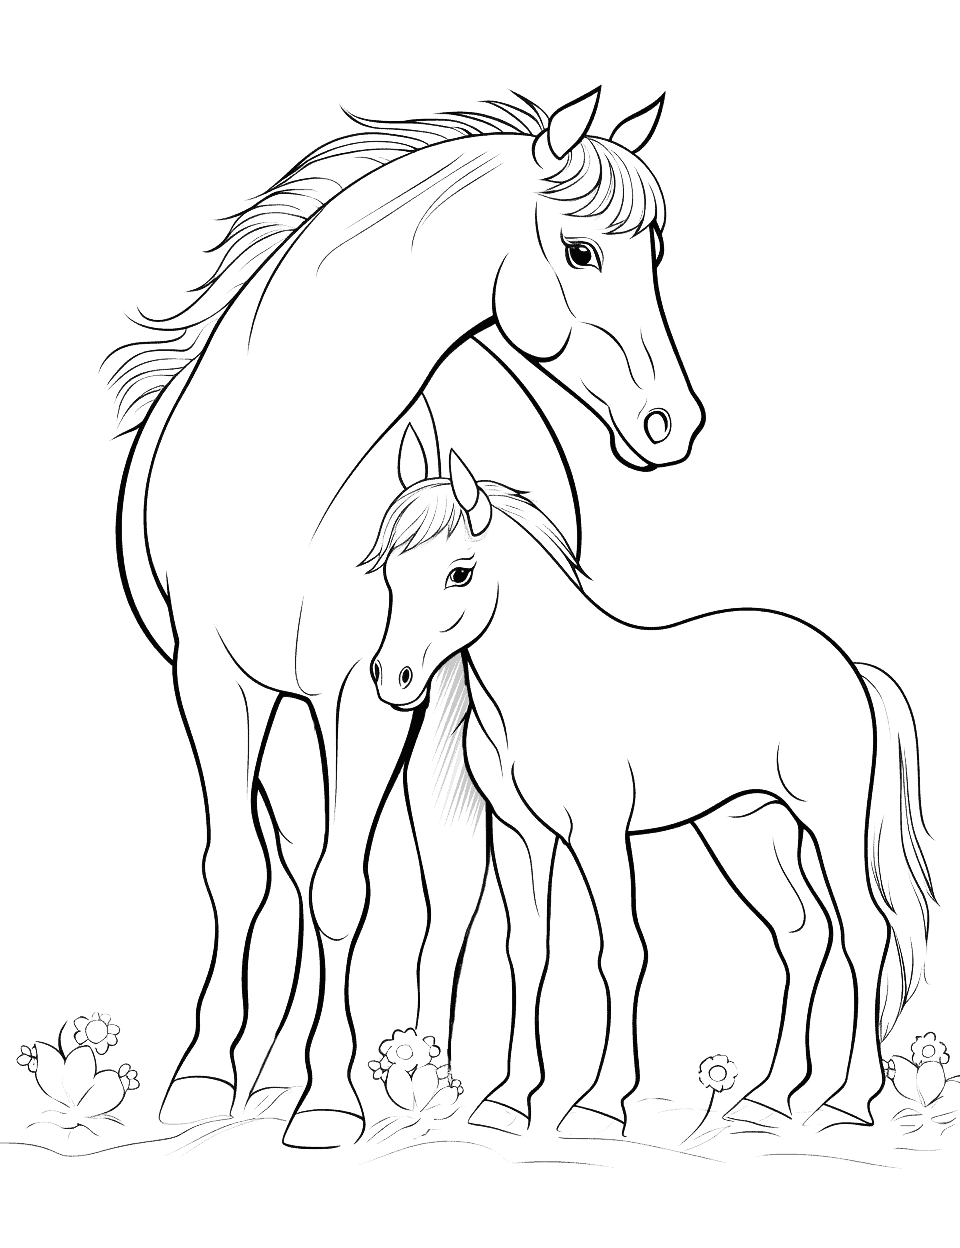 Cute Foal and Mother Horse Coloring Page - A cute scene of a foal nuzzling its mother.